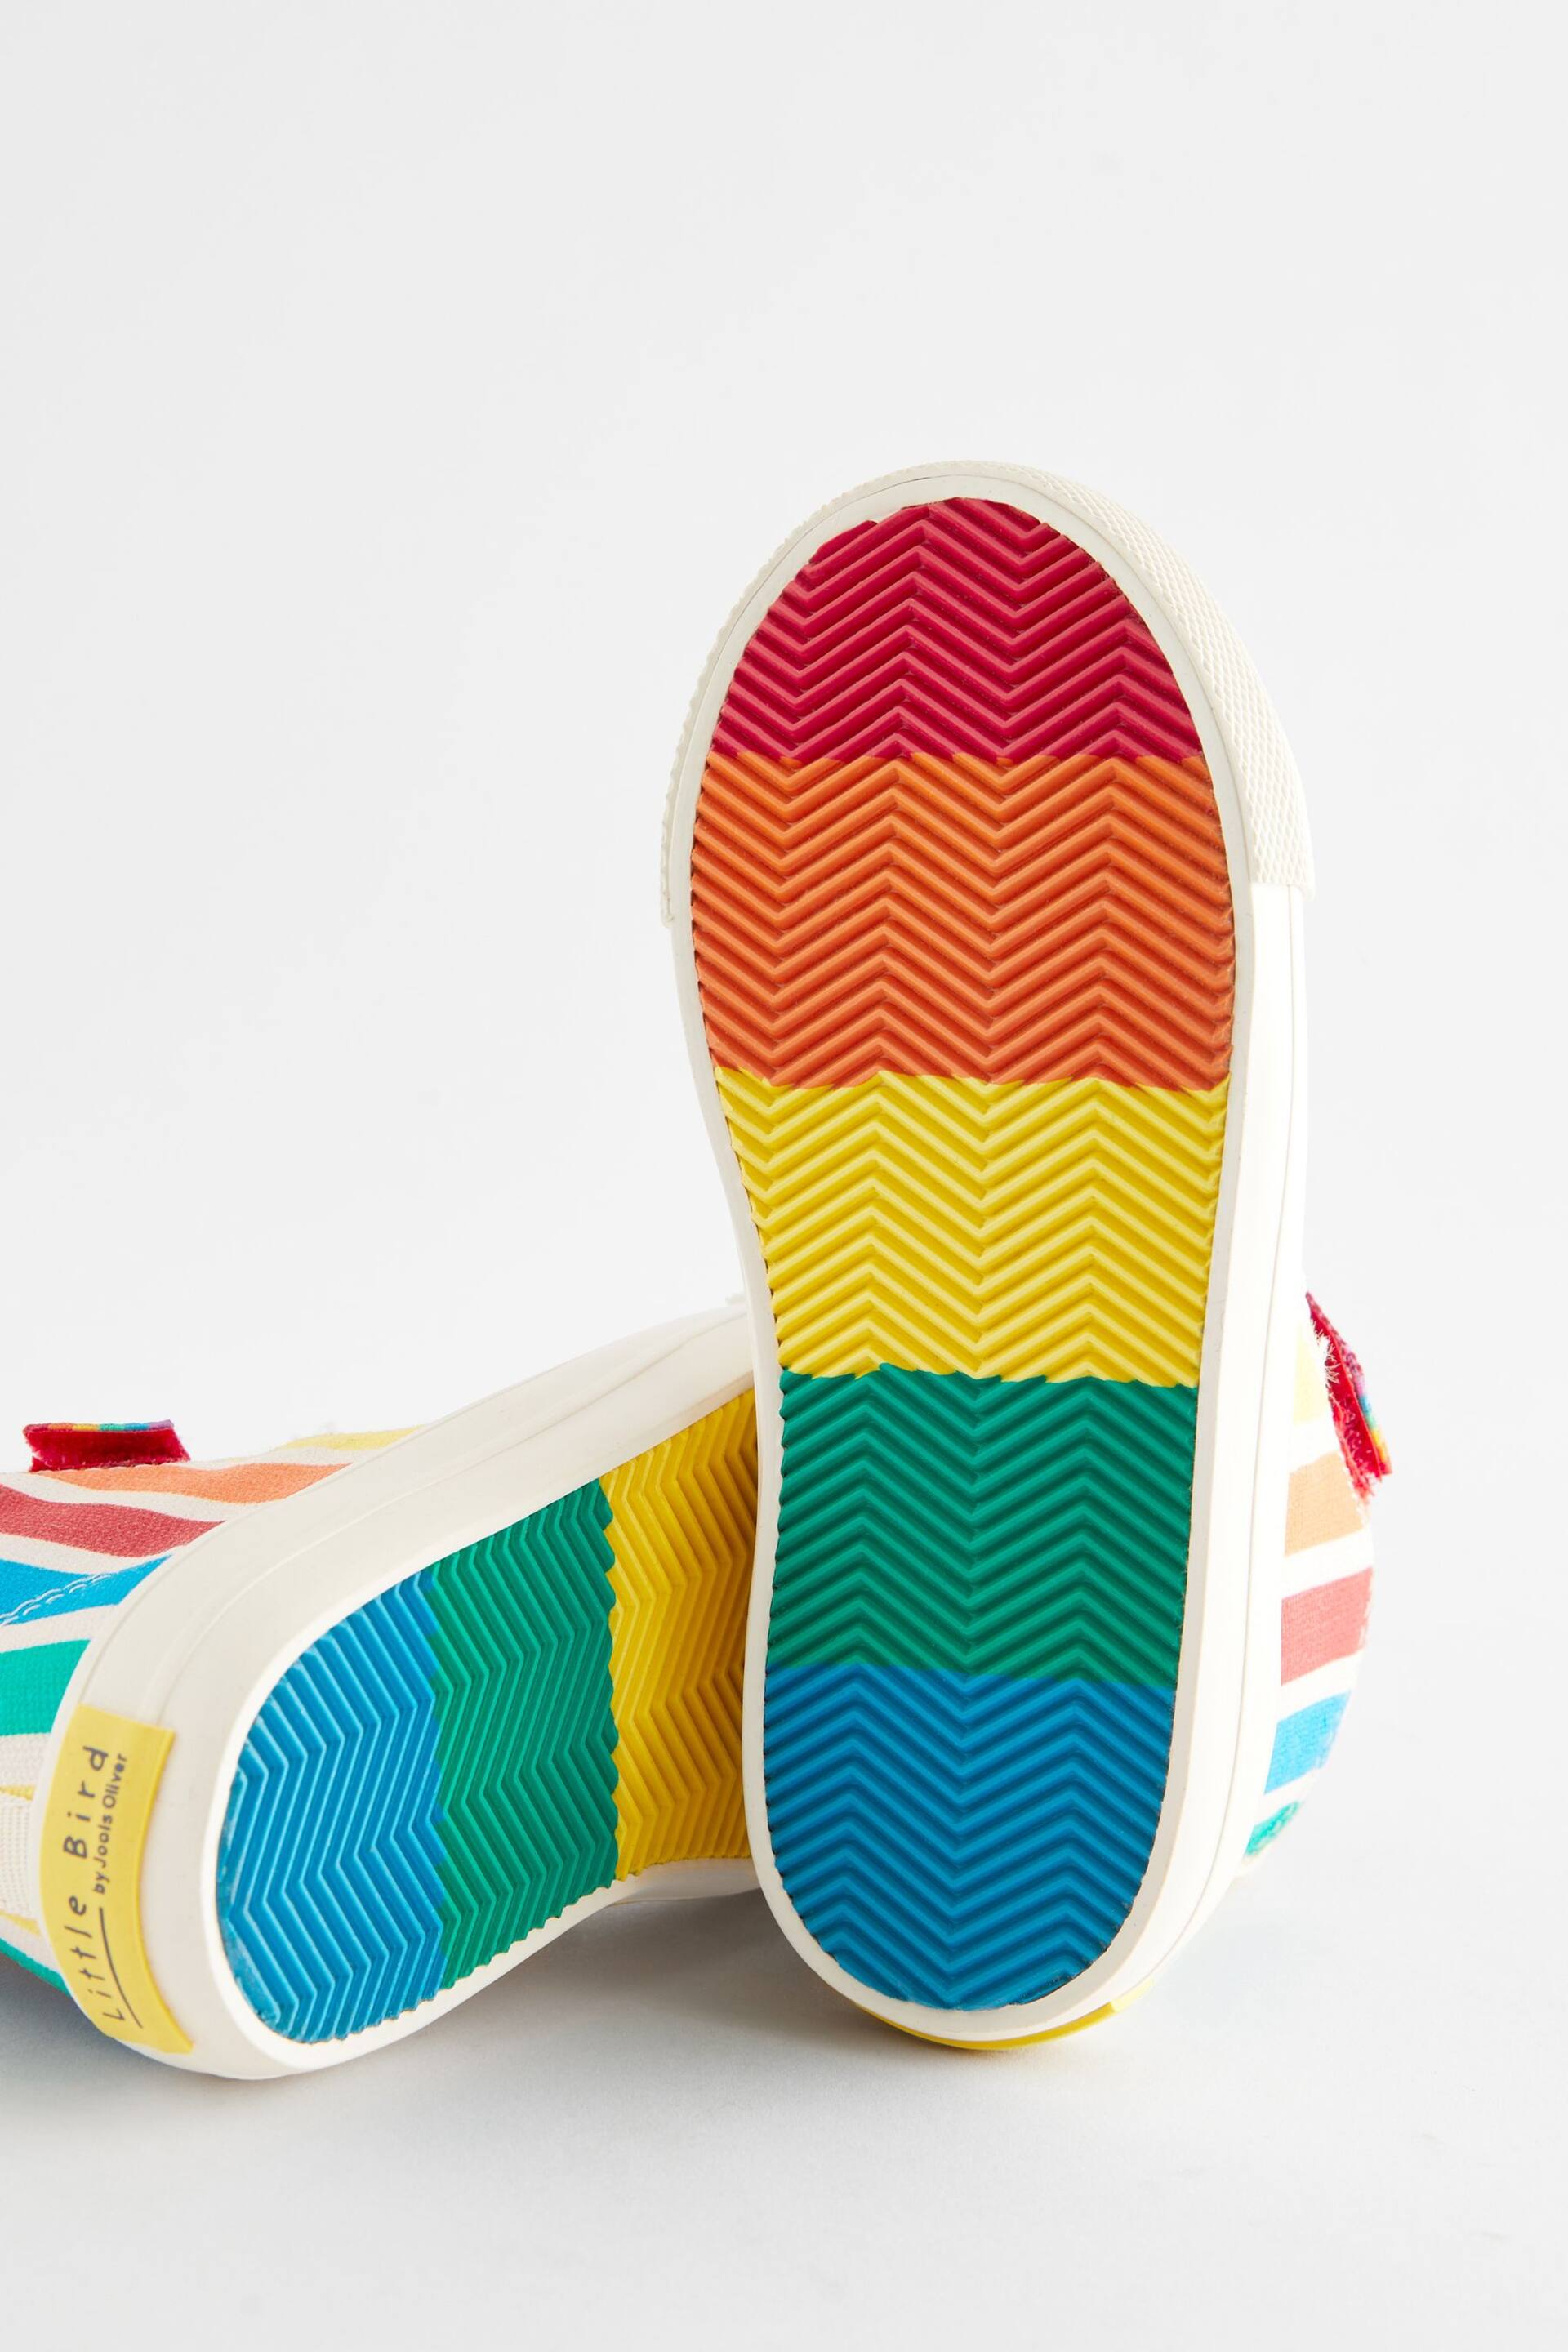 Little Bird by Jools Oliver Multi Rainbow Stripe Canvas Trainers - Image 6 of 6